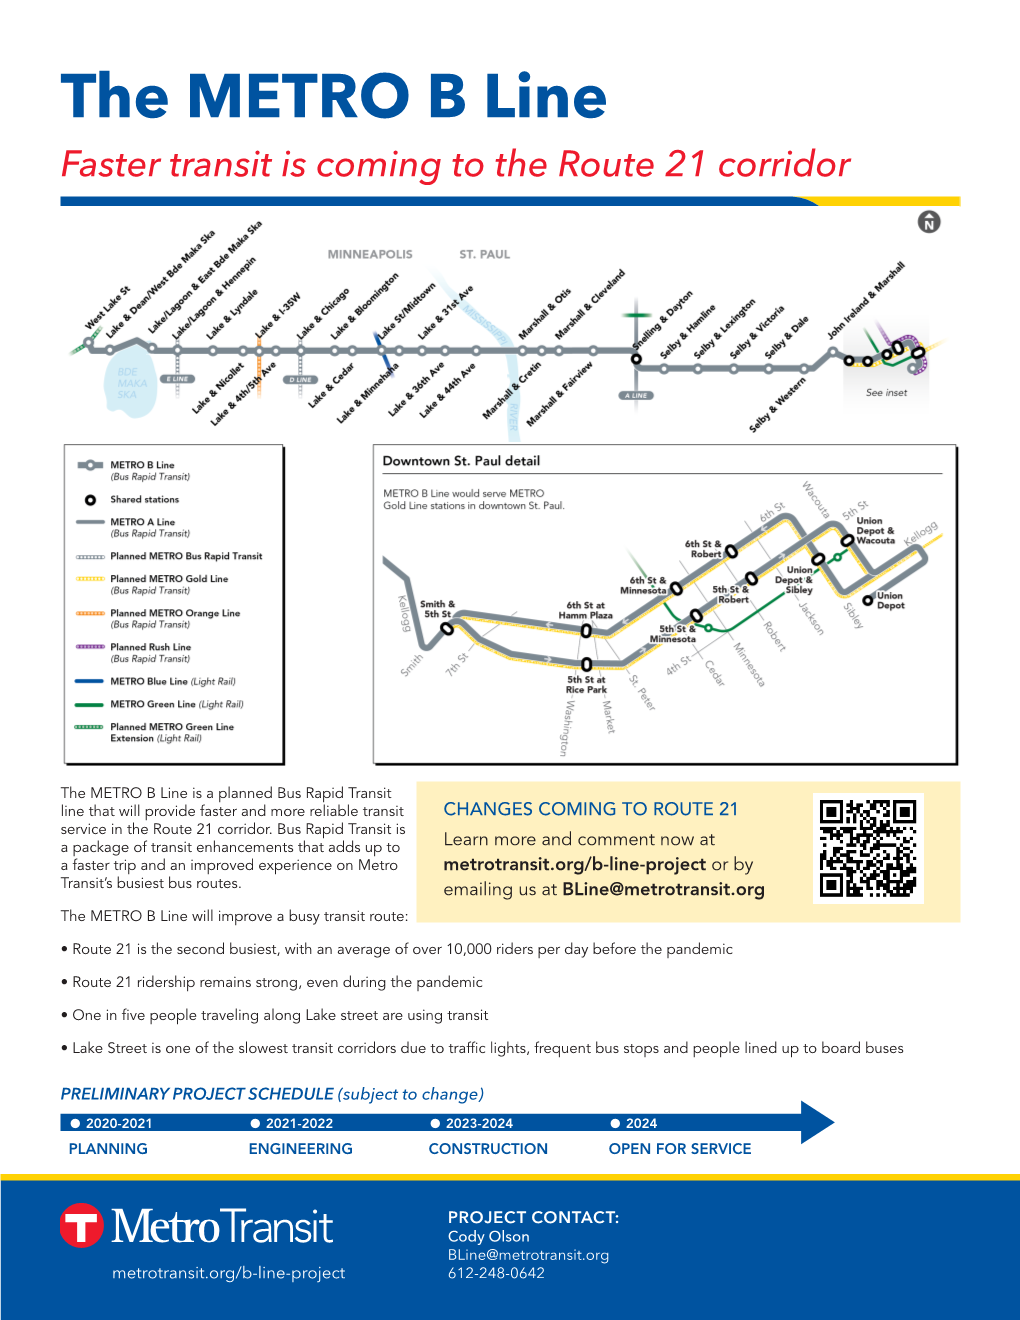 The METRO B Line Faster Transit Is Coming to the Route 21 Corridor